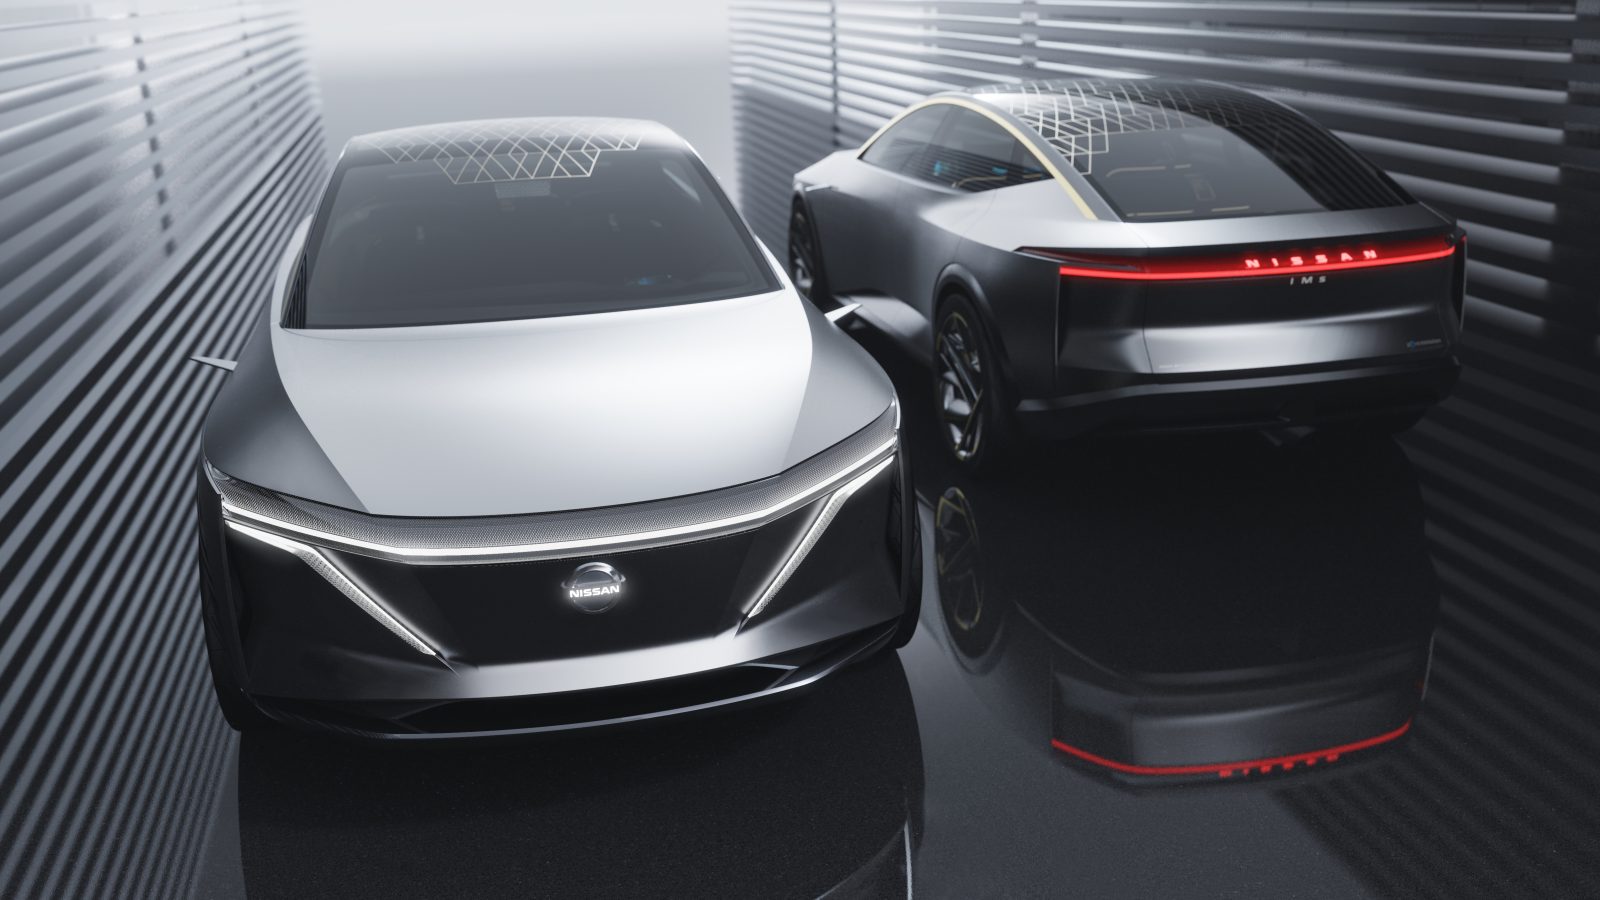 photo of Nissan IMs concept unveiled, elevated sports sedan BEV with pimpin’ back seat image